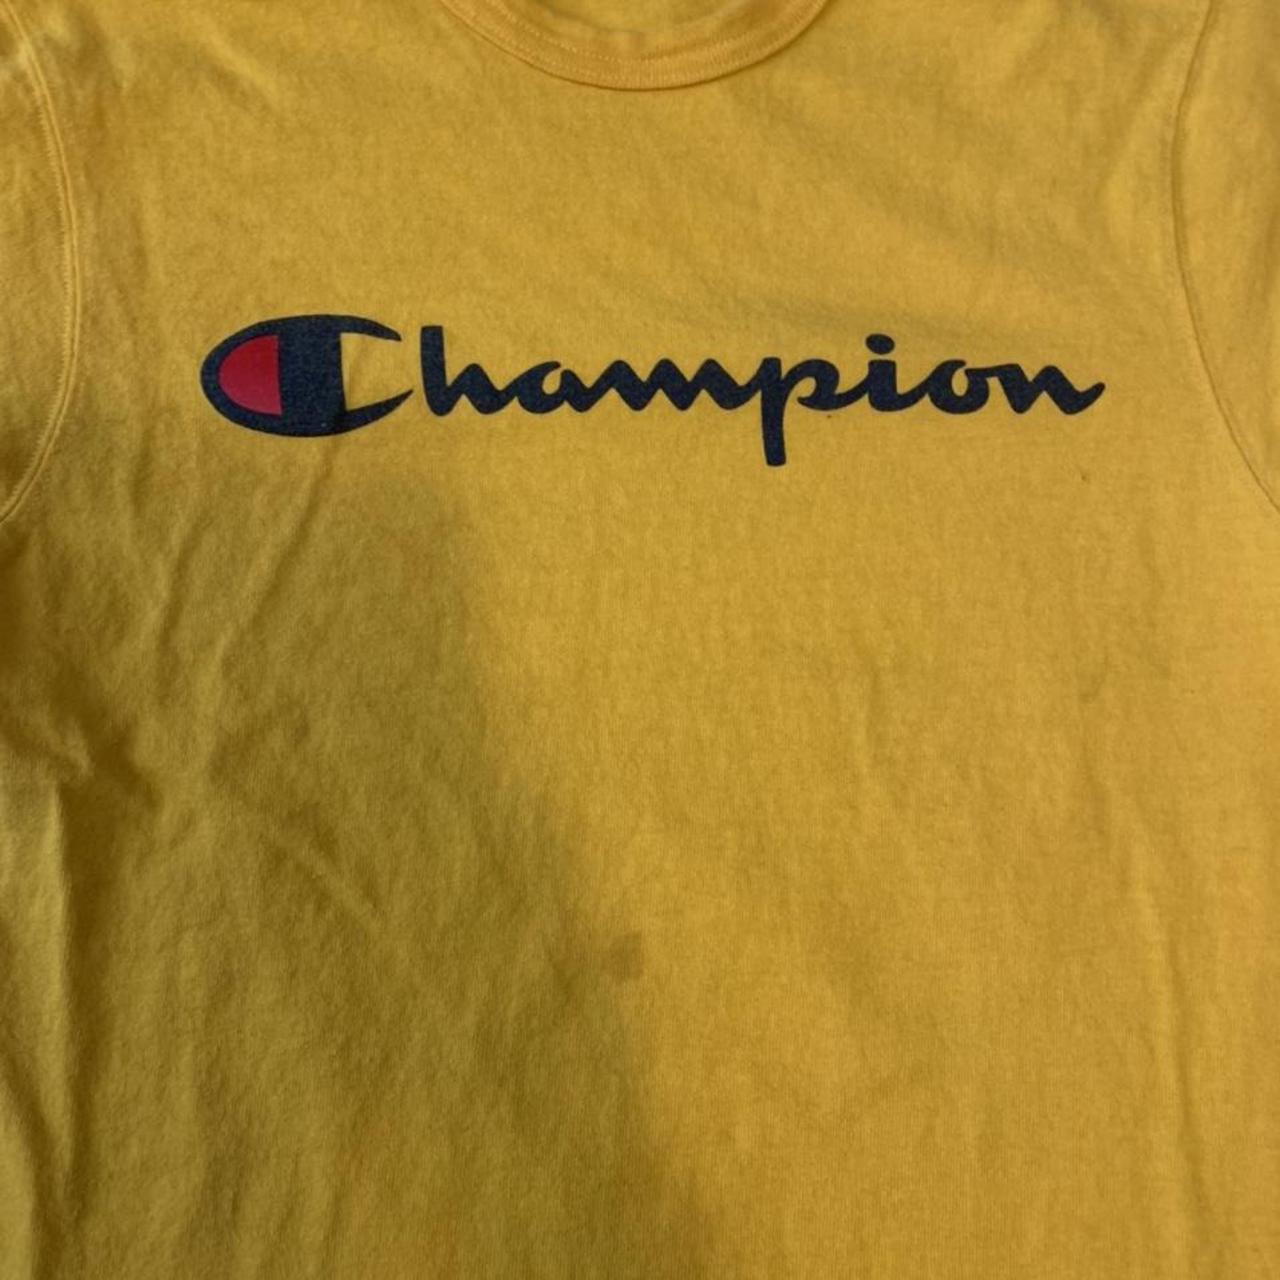 Has a small stain shown on picture #champion - Depop